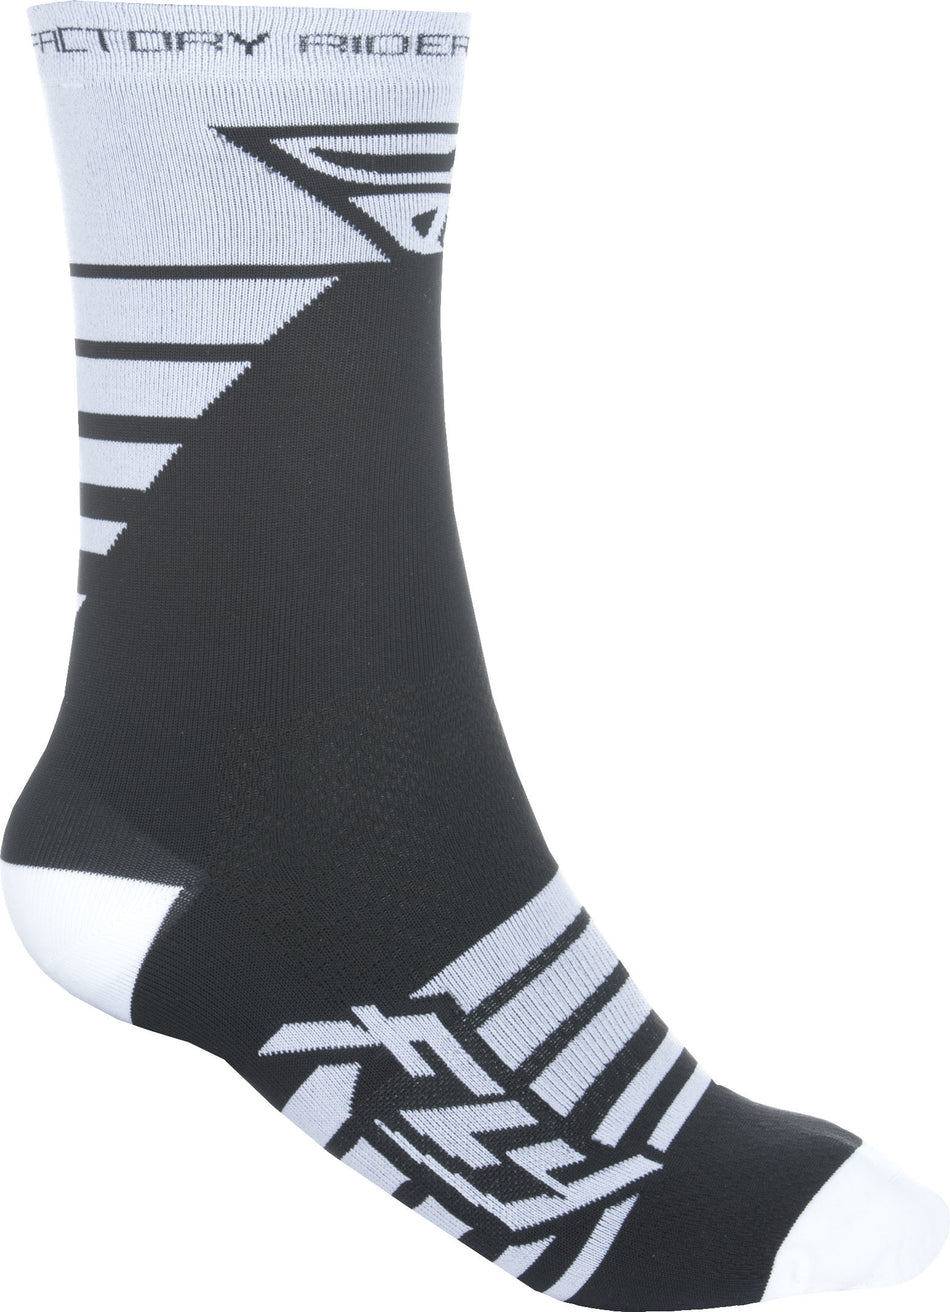 FLY RACING Factory Rider Socks White/Black Sm/Md 350-0354S